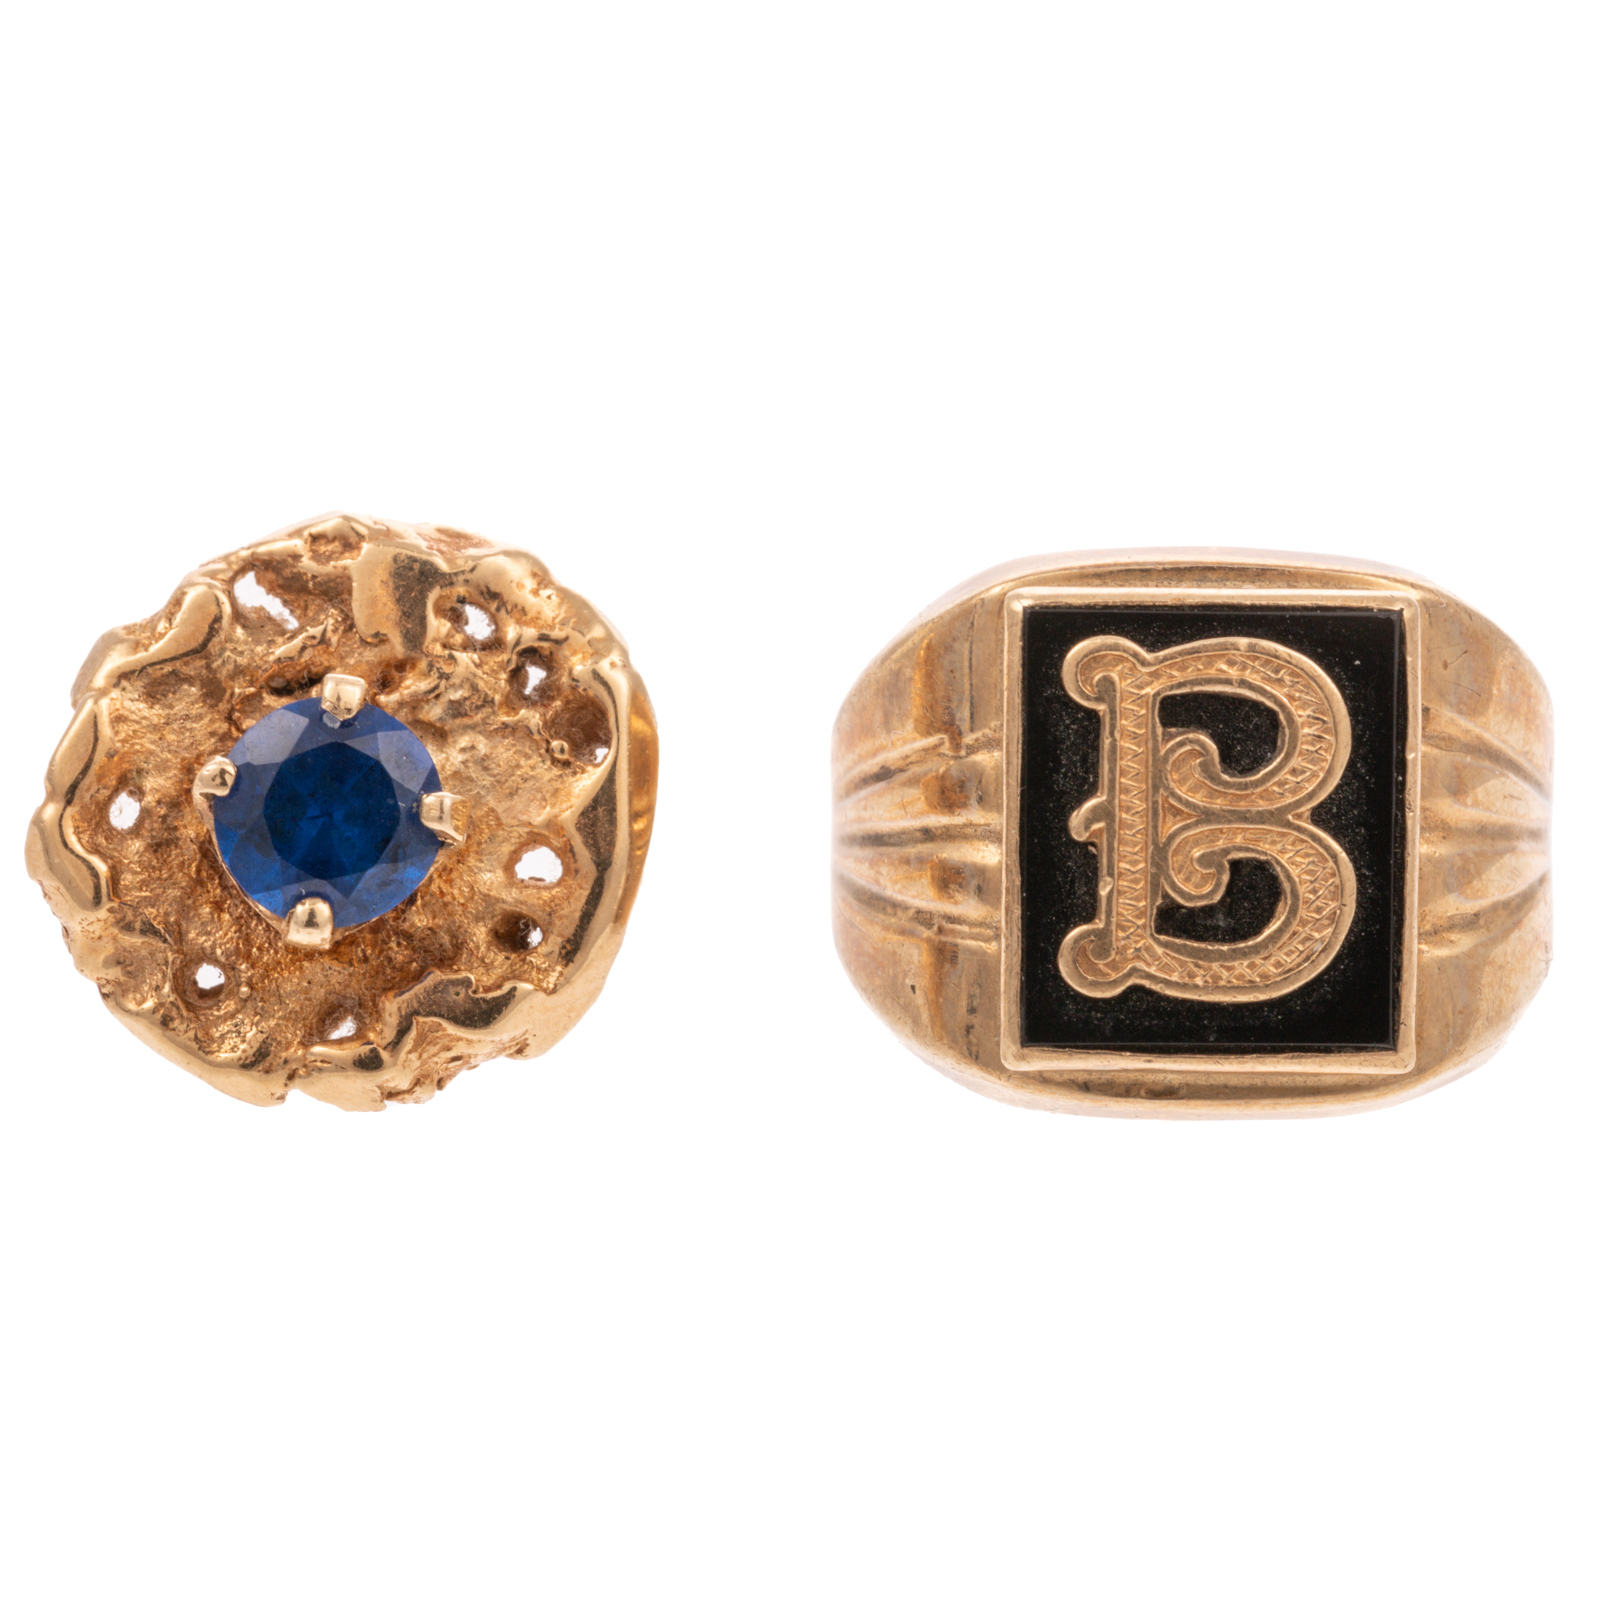 A TIE TACK & INITIAL RING IN 14K